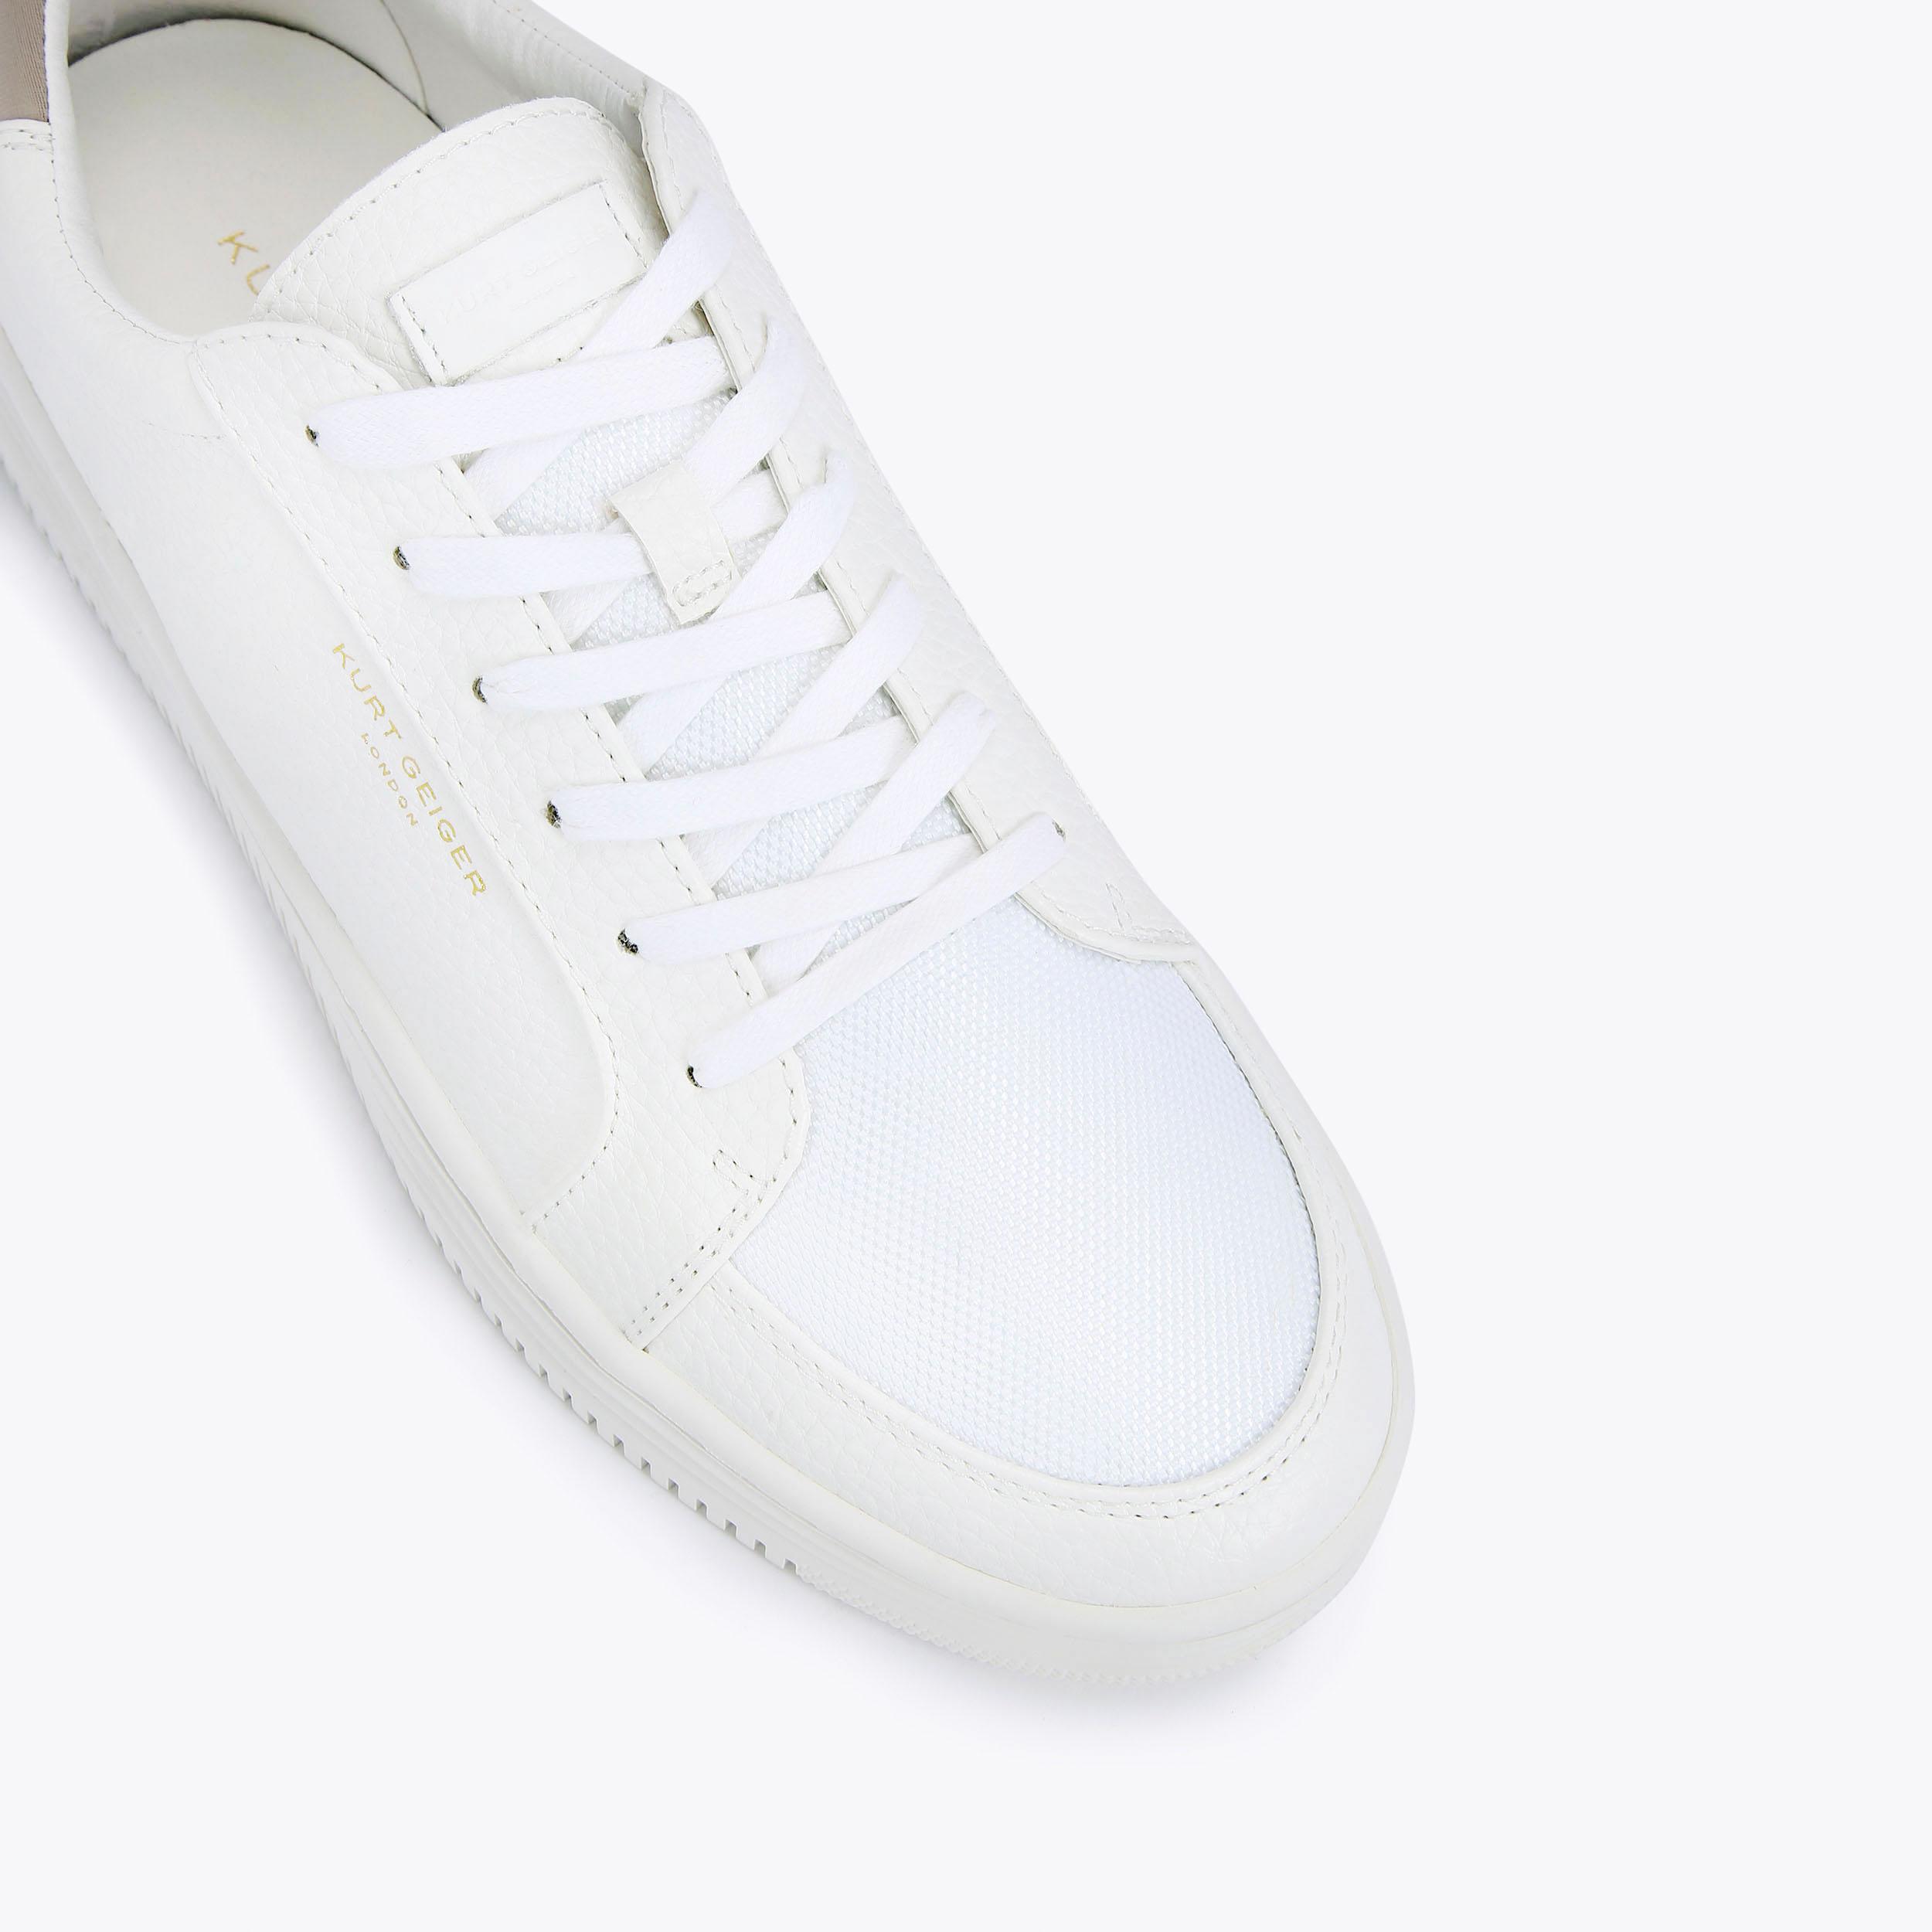 VALADEZ White Low Top Trainers by KURT GEIGER LONDON